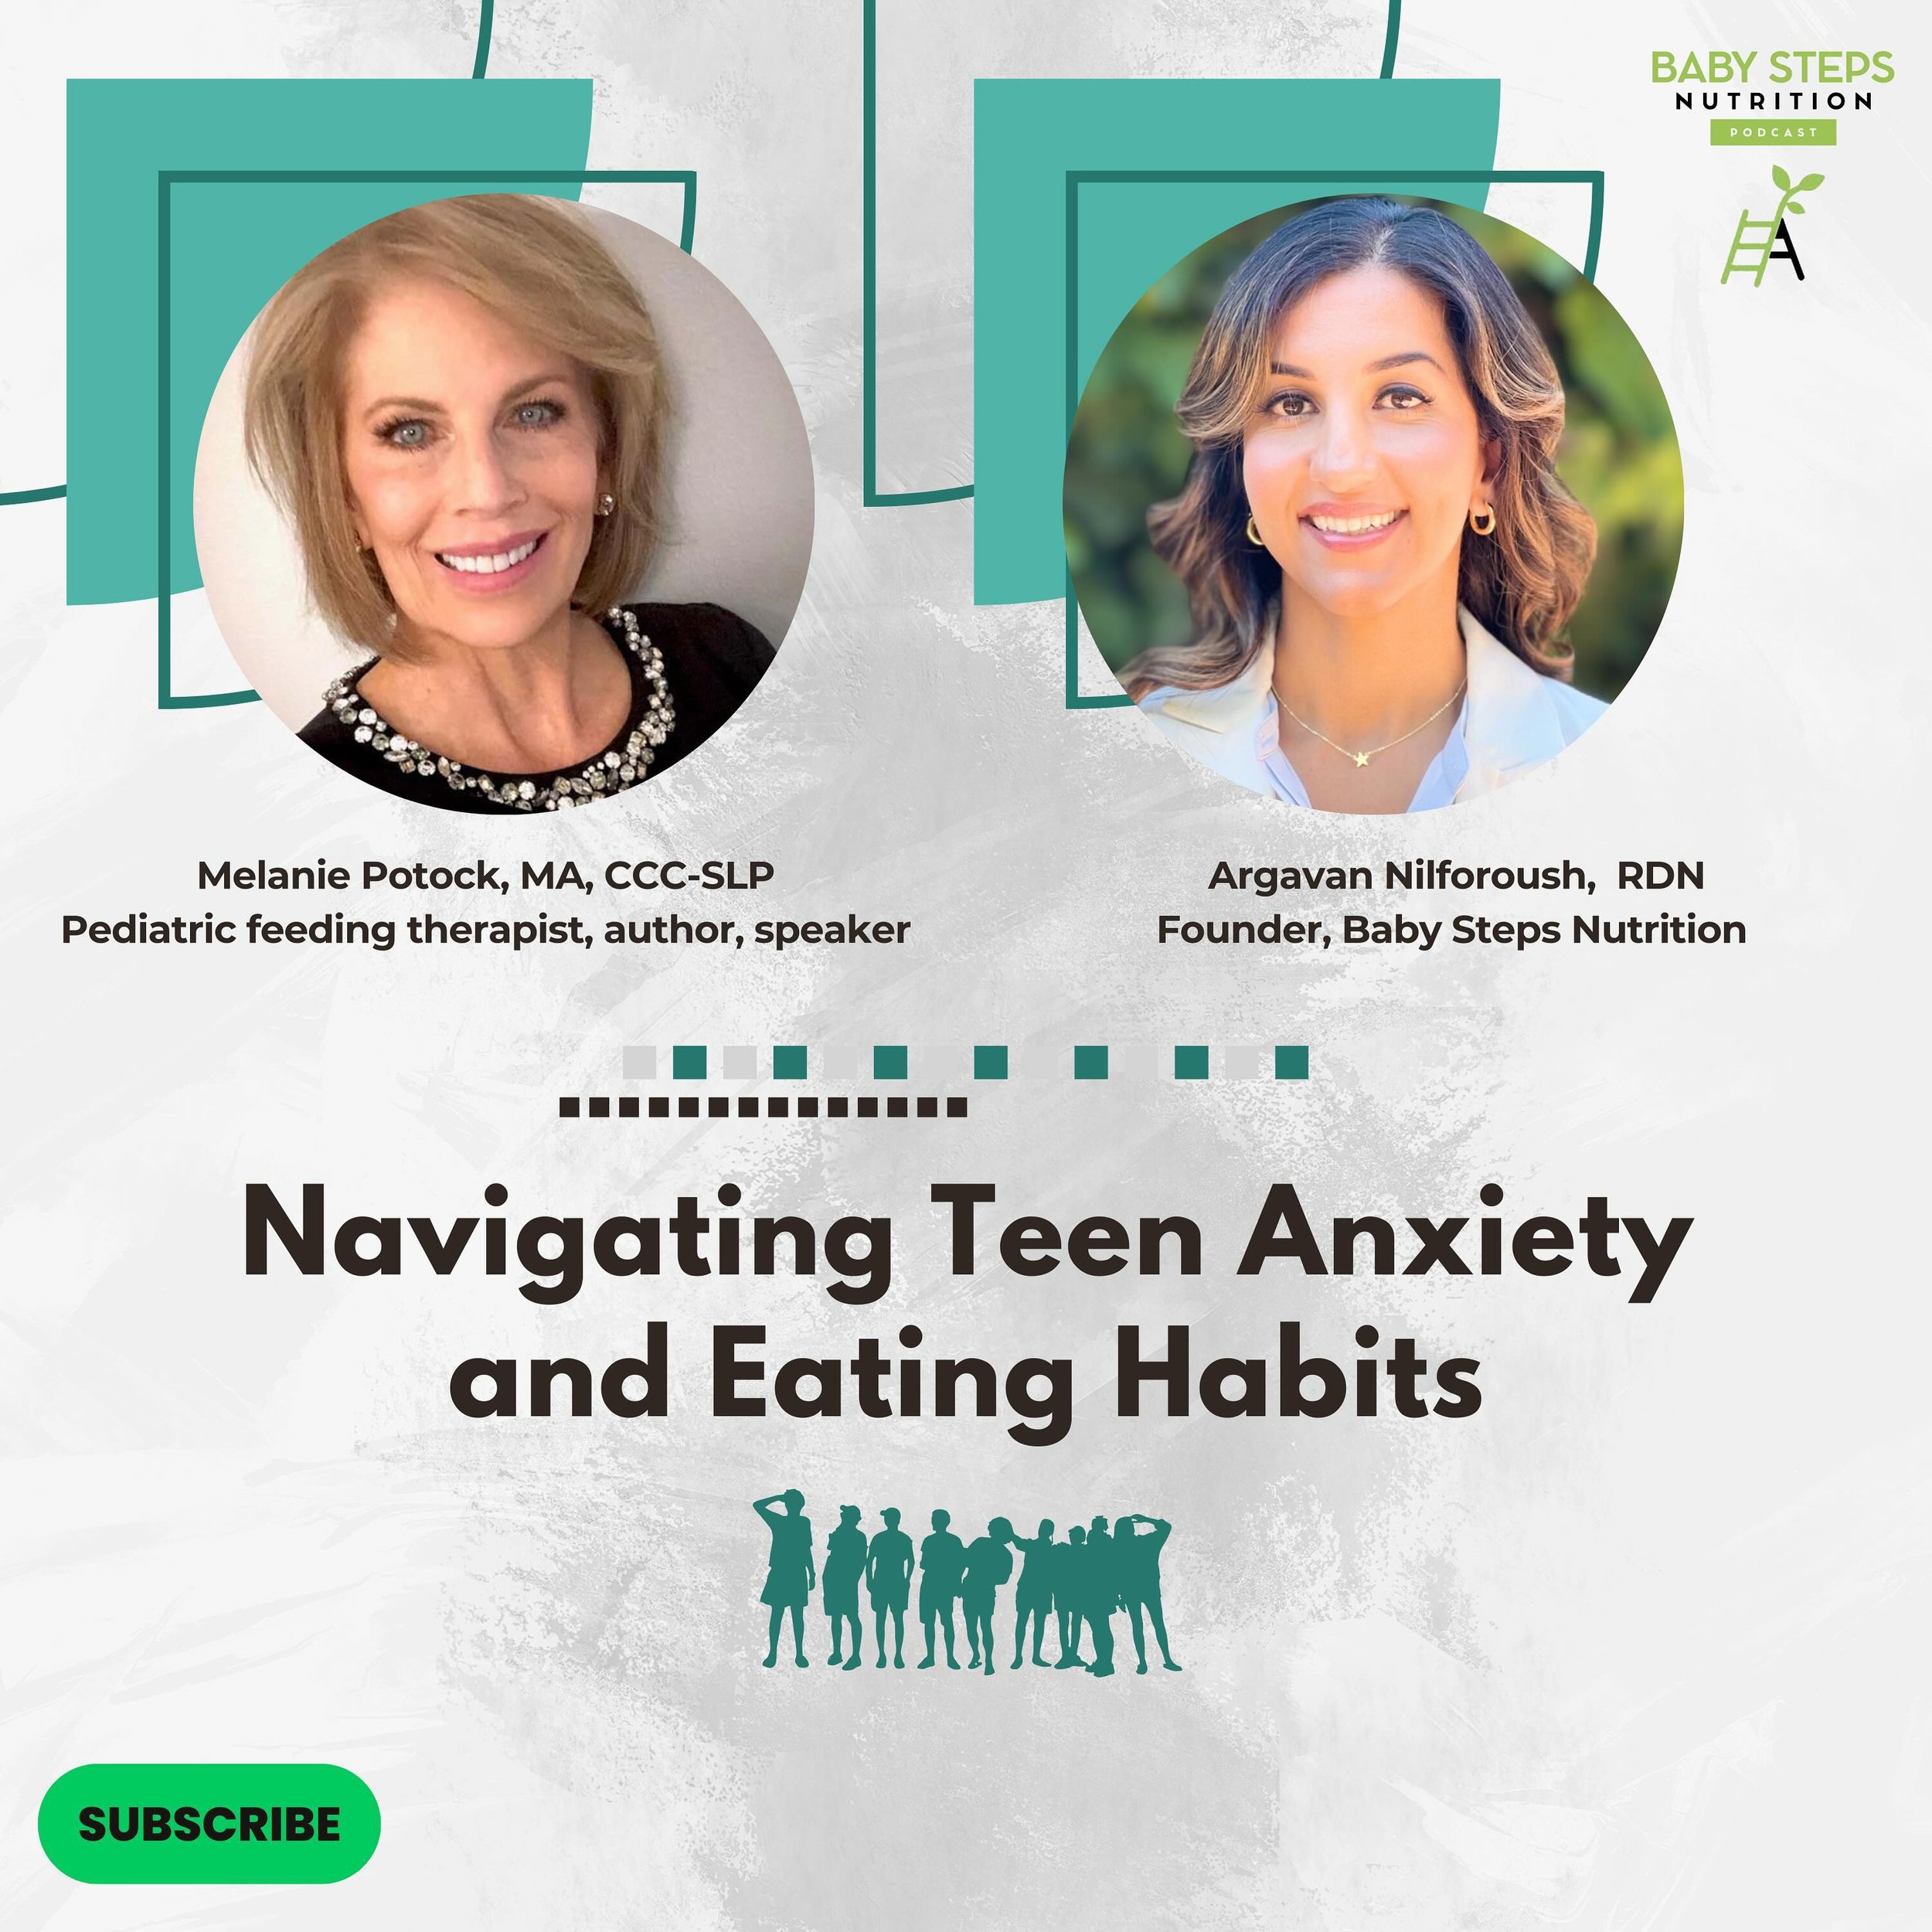 🔍 Sneak peek alert! Catch a glimpse of our upcoming episode: 'Navigating Teen Anxiety and Eating Habits' with the amazing Melanie Potock, MA, CCC-SLP. 

Don't miss out!🌟 Follow/subscribe to the Baby Steps Nutrition Podcast for all our latest releas